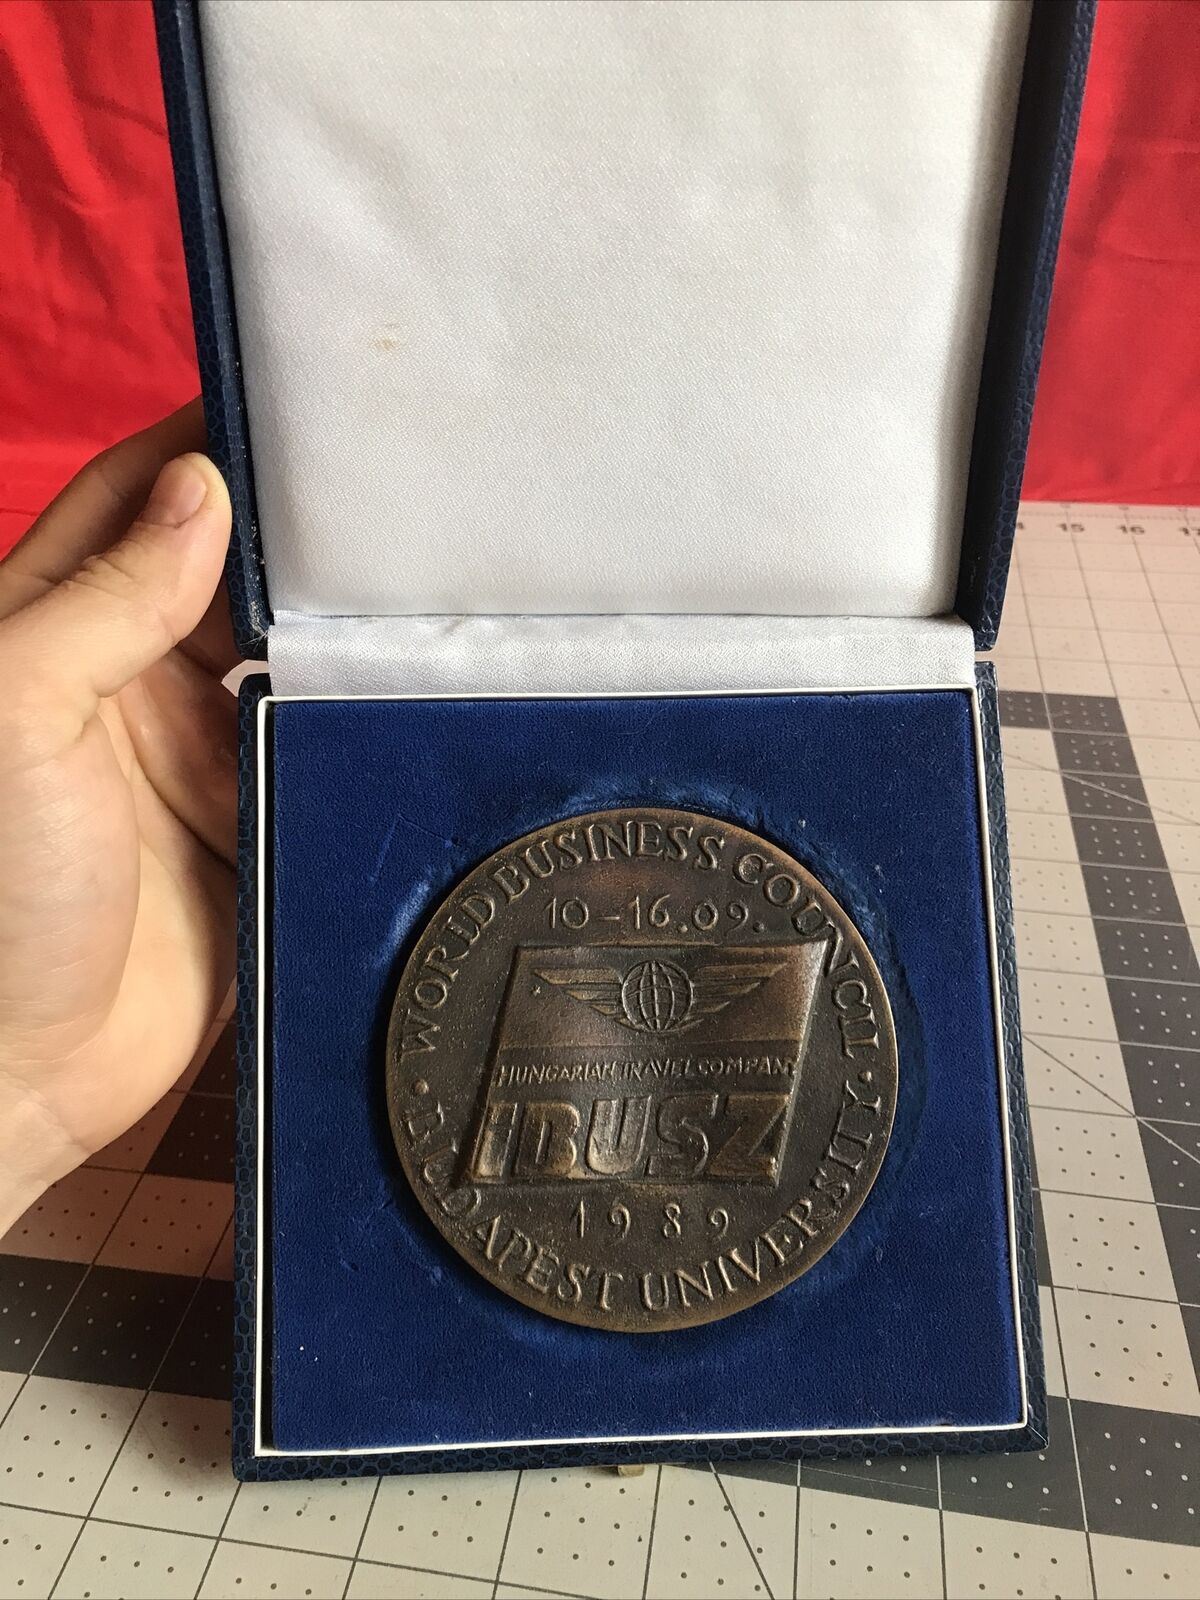 Vintage 1989 World Business Council Budapest University iBUSZ Medal Very Rare